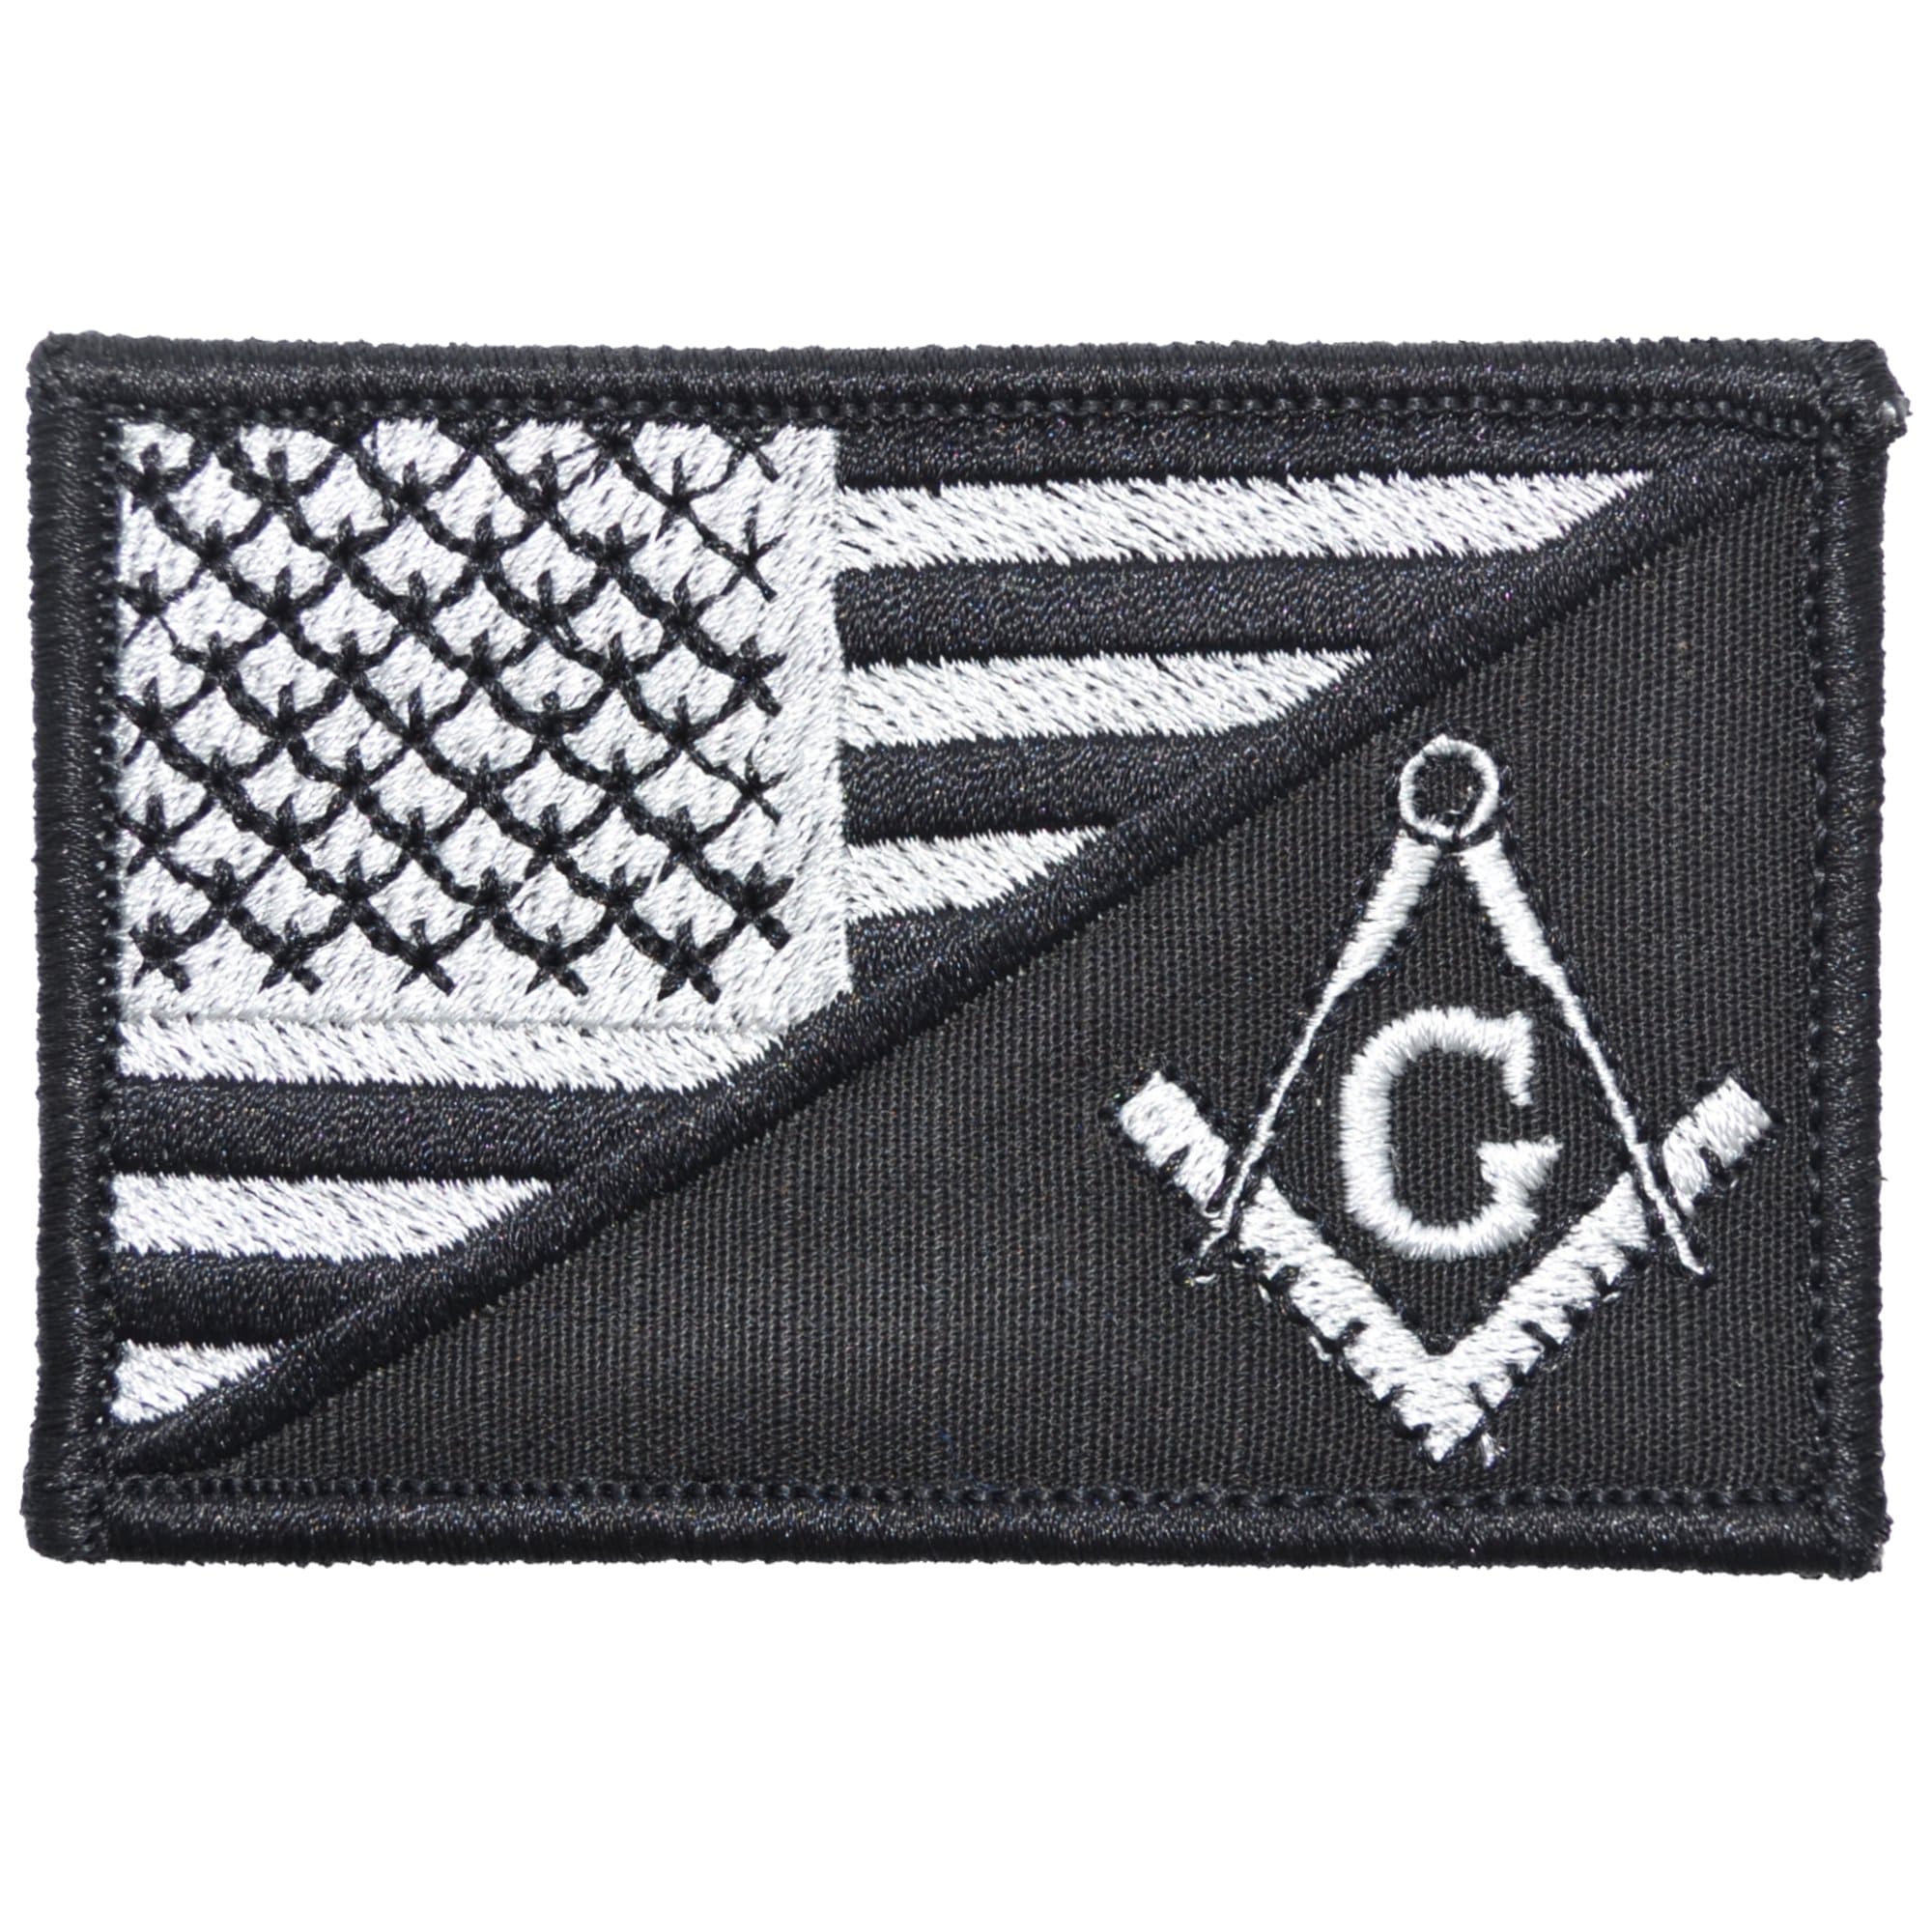 Tactical Gear Junkie Patches Black Masonic Square and Compasses USA Flag - 2.25x3.5 Patch